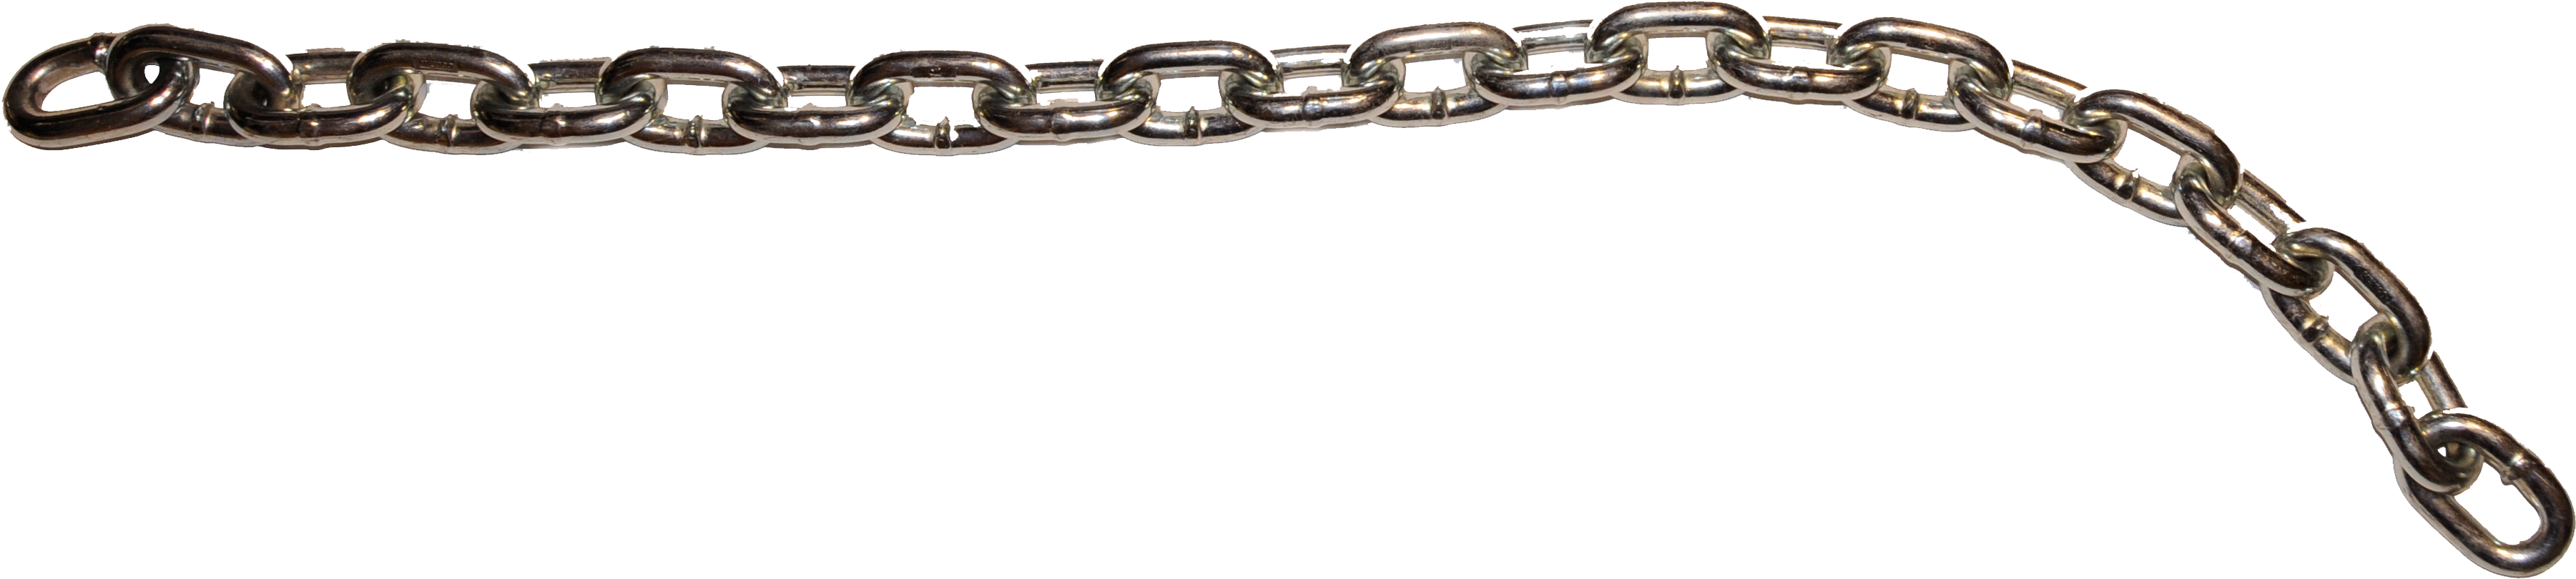 A Close-up Of A Chain